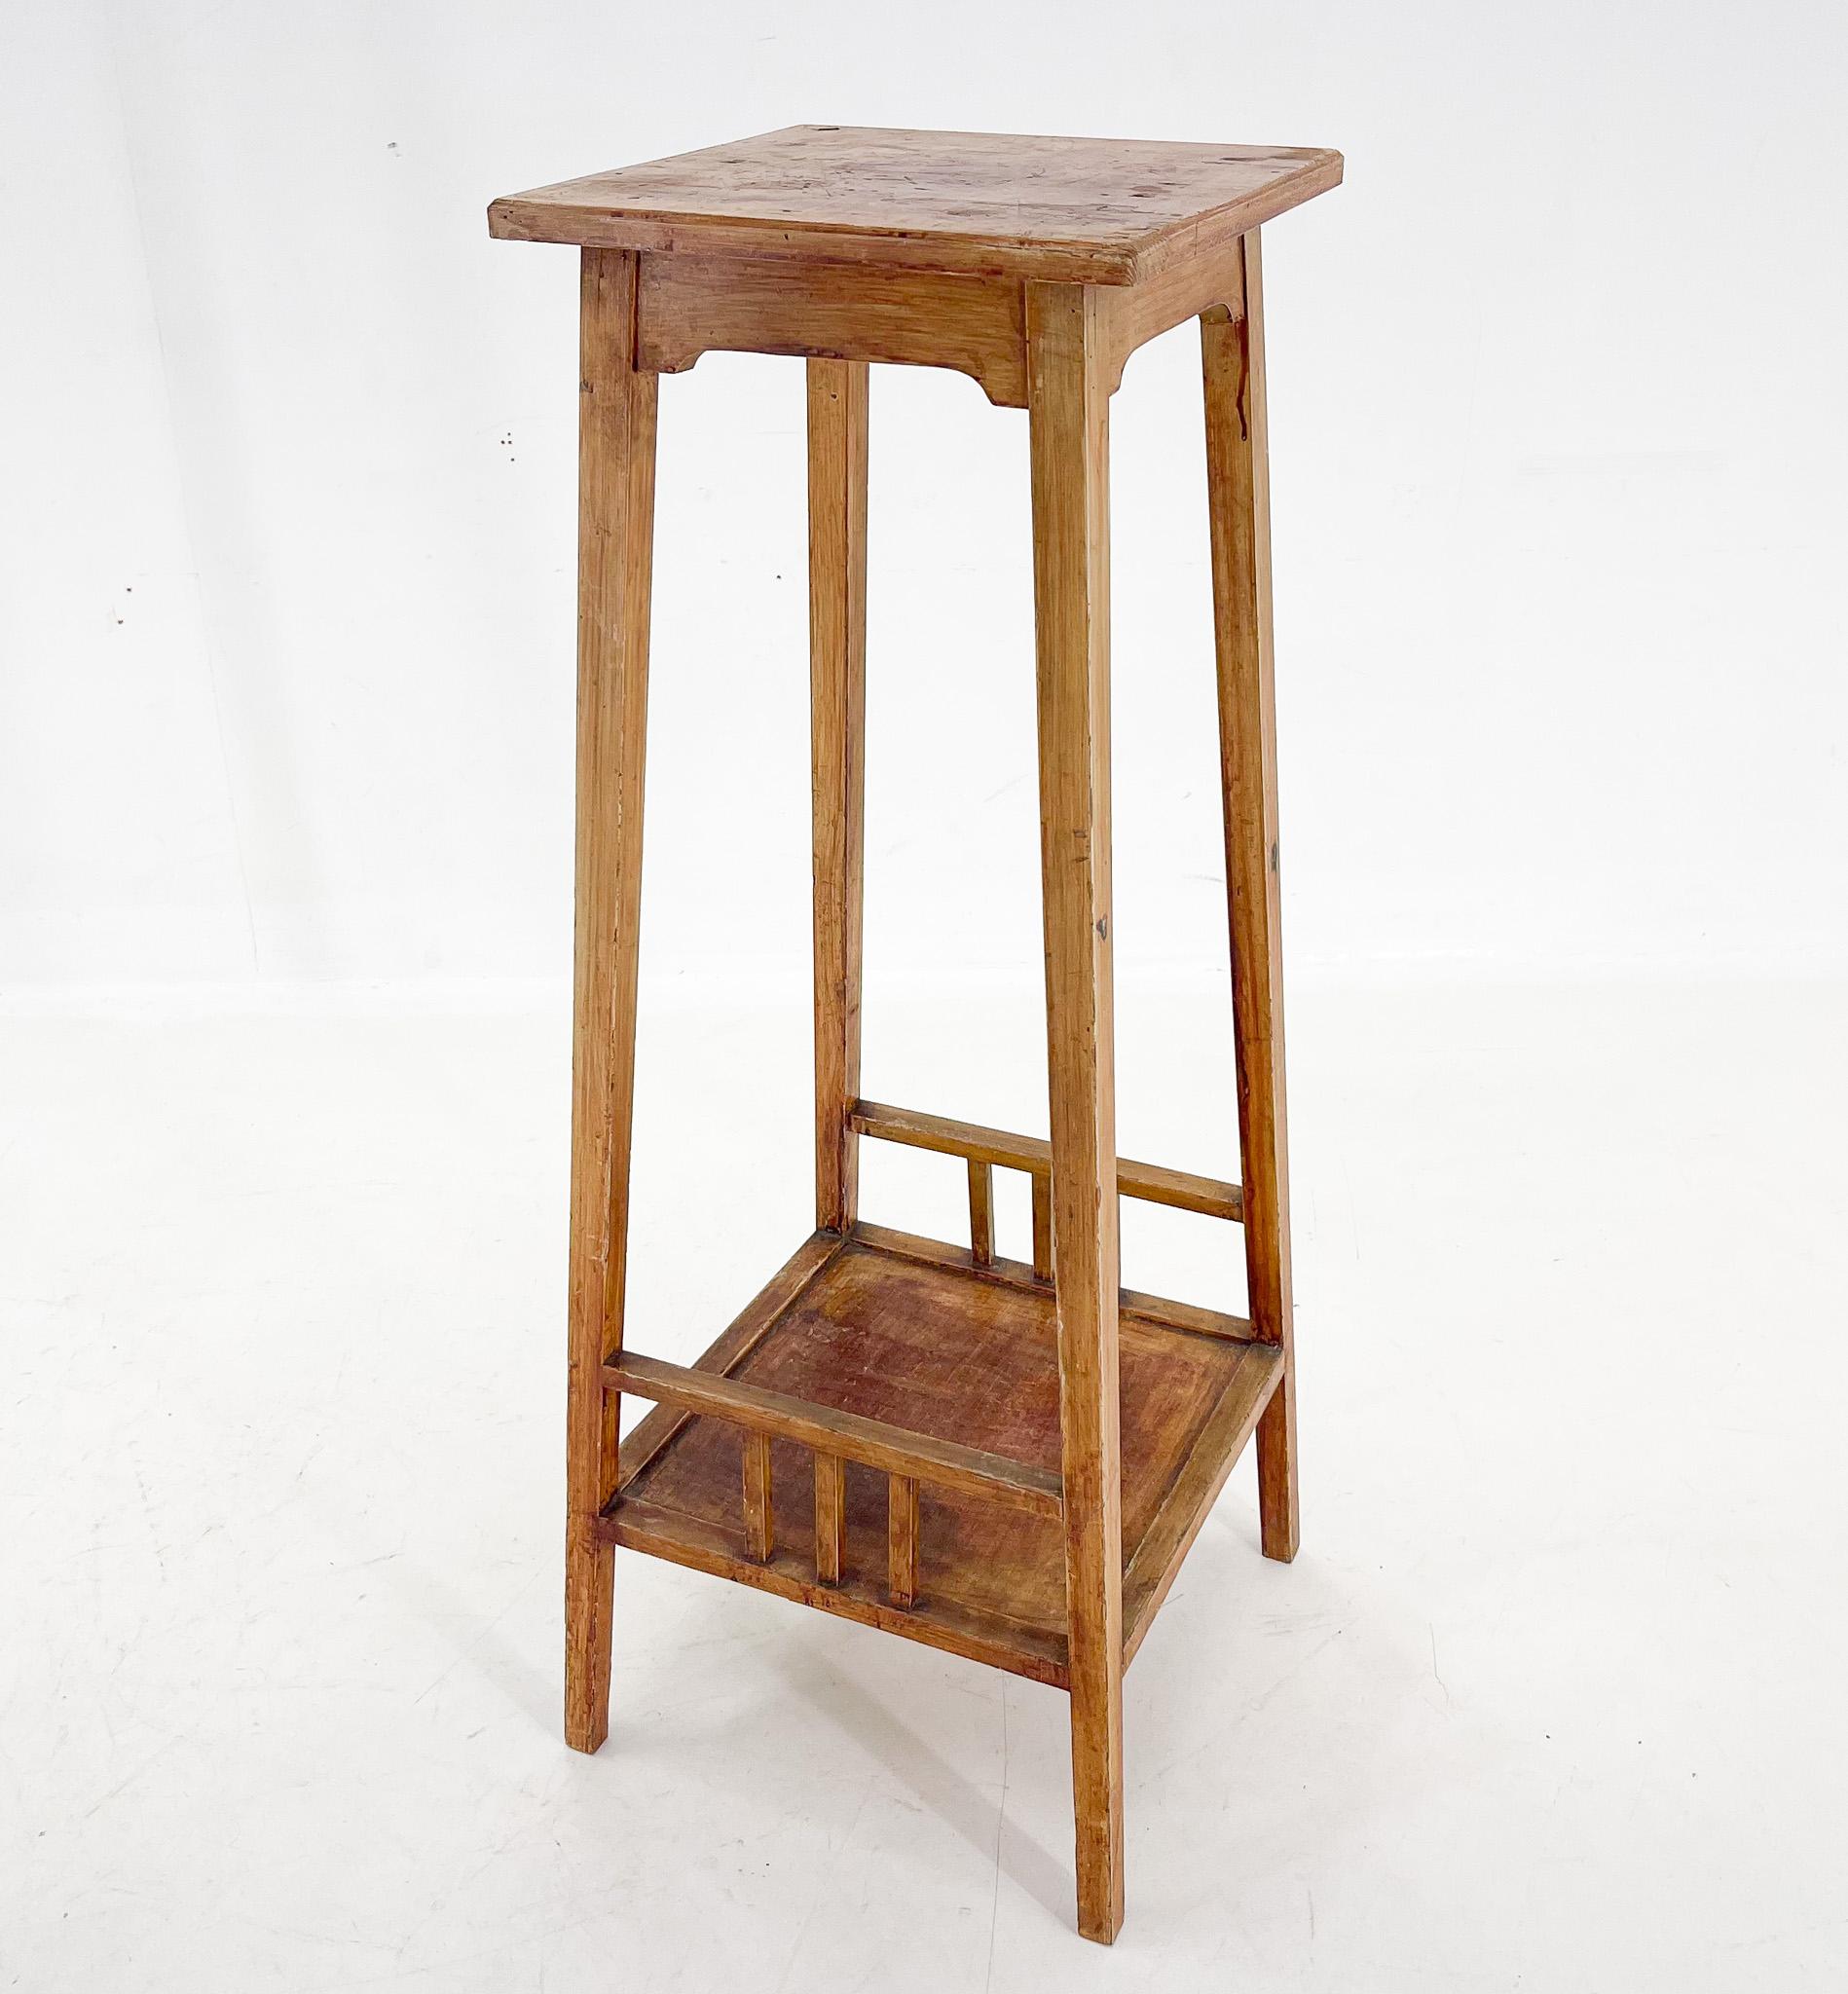 Tall wooden plant stand from the 1930's with original patina. Very stable. The top is approximately 35 cm wide and 35 cm deep.
